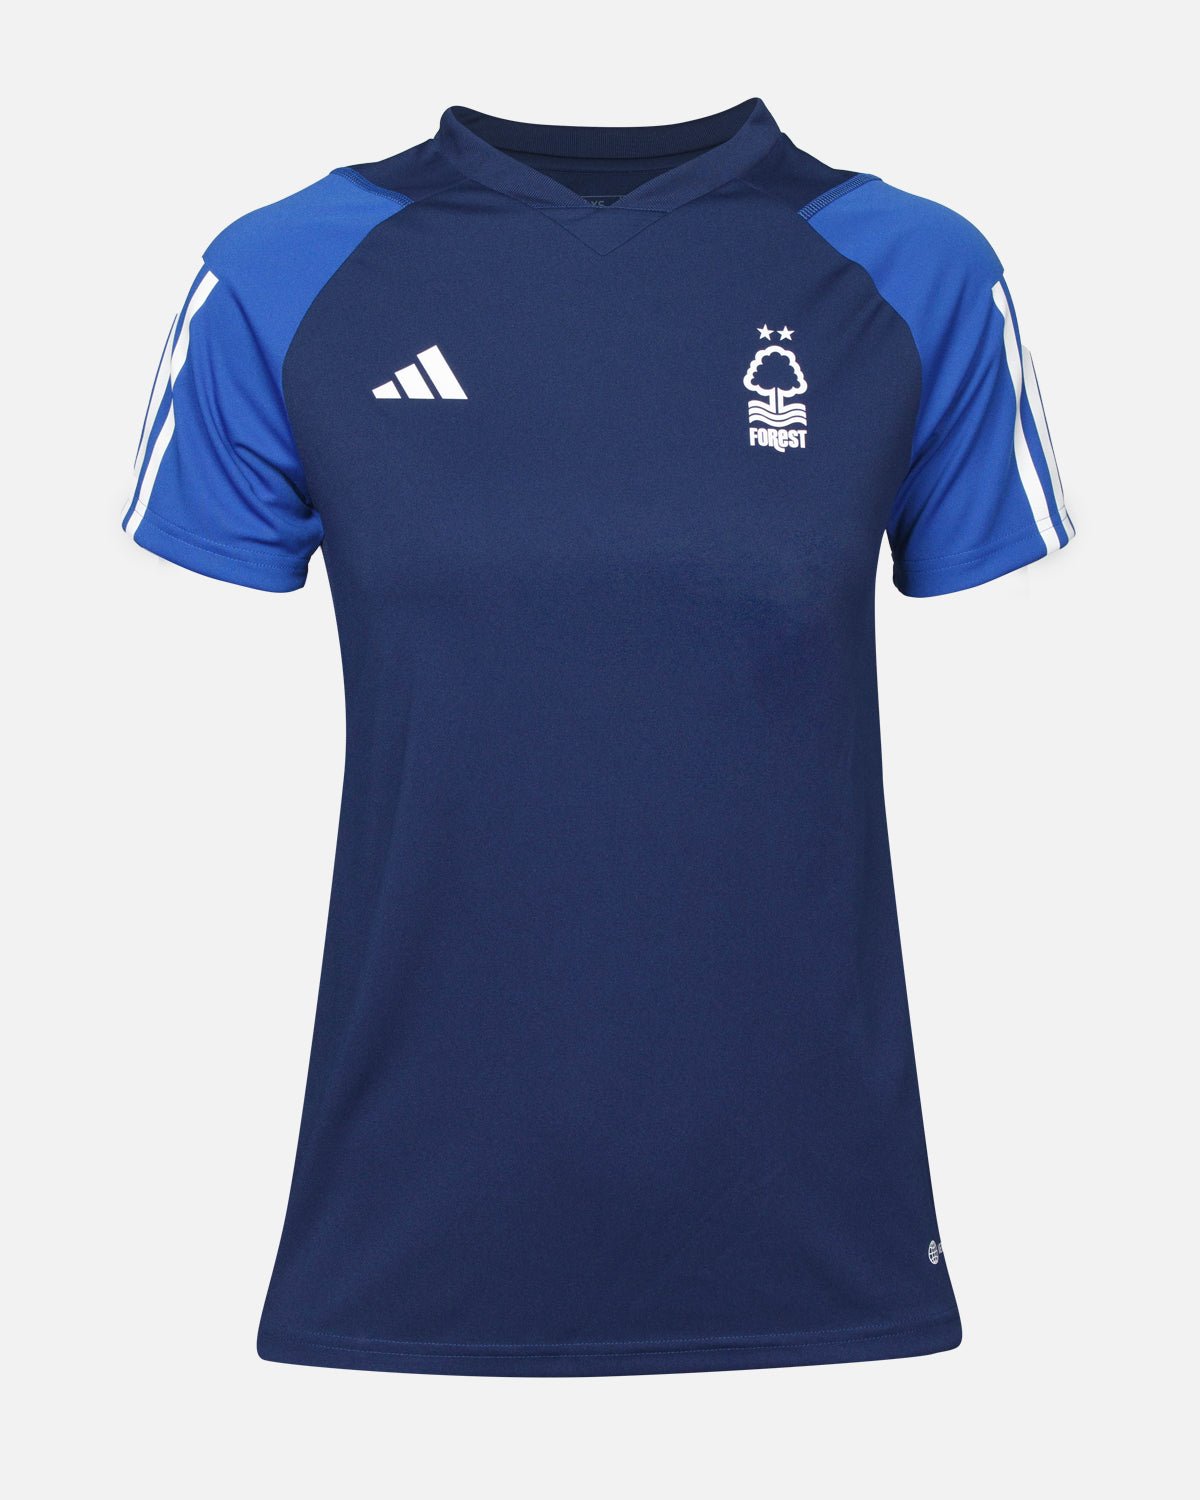 NFFC Women's Navy Training Jersey 23-24 - Nottingham Forest FC